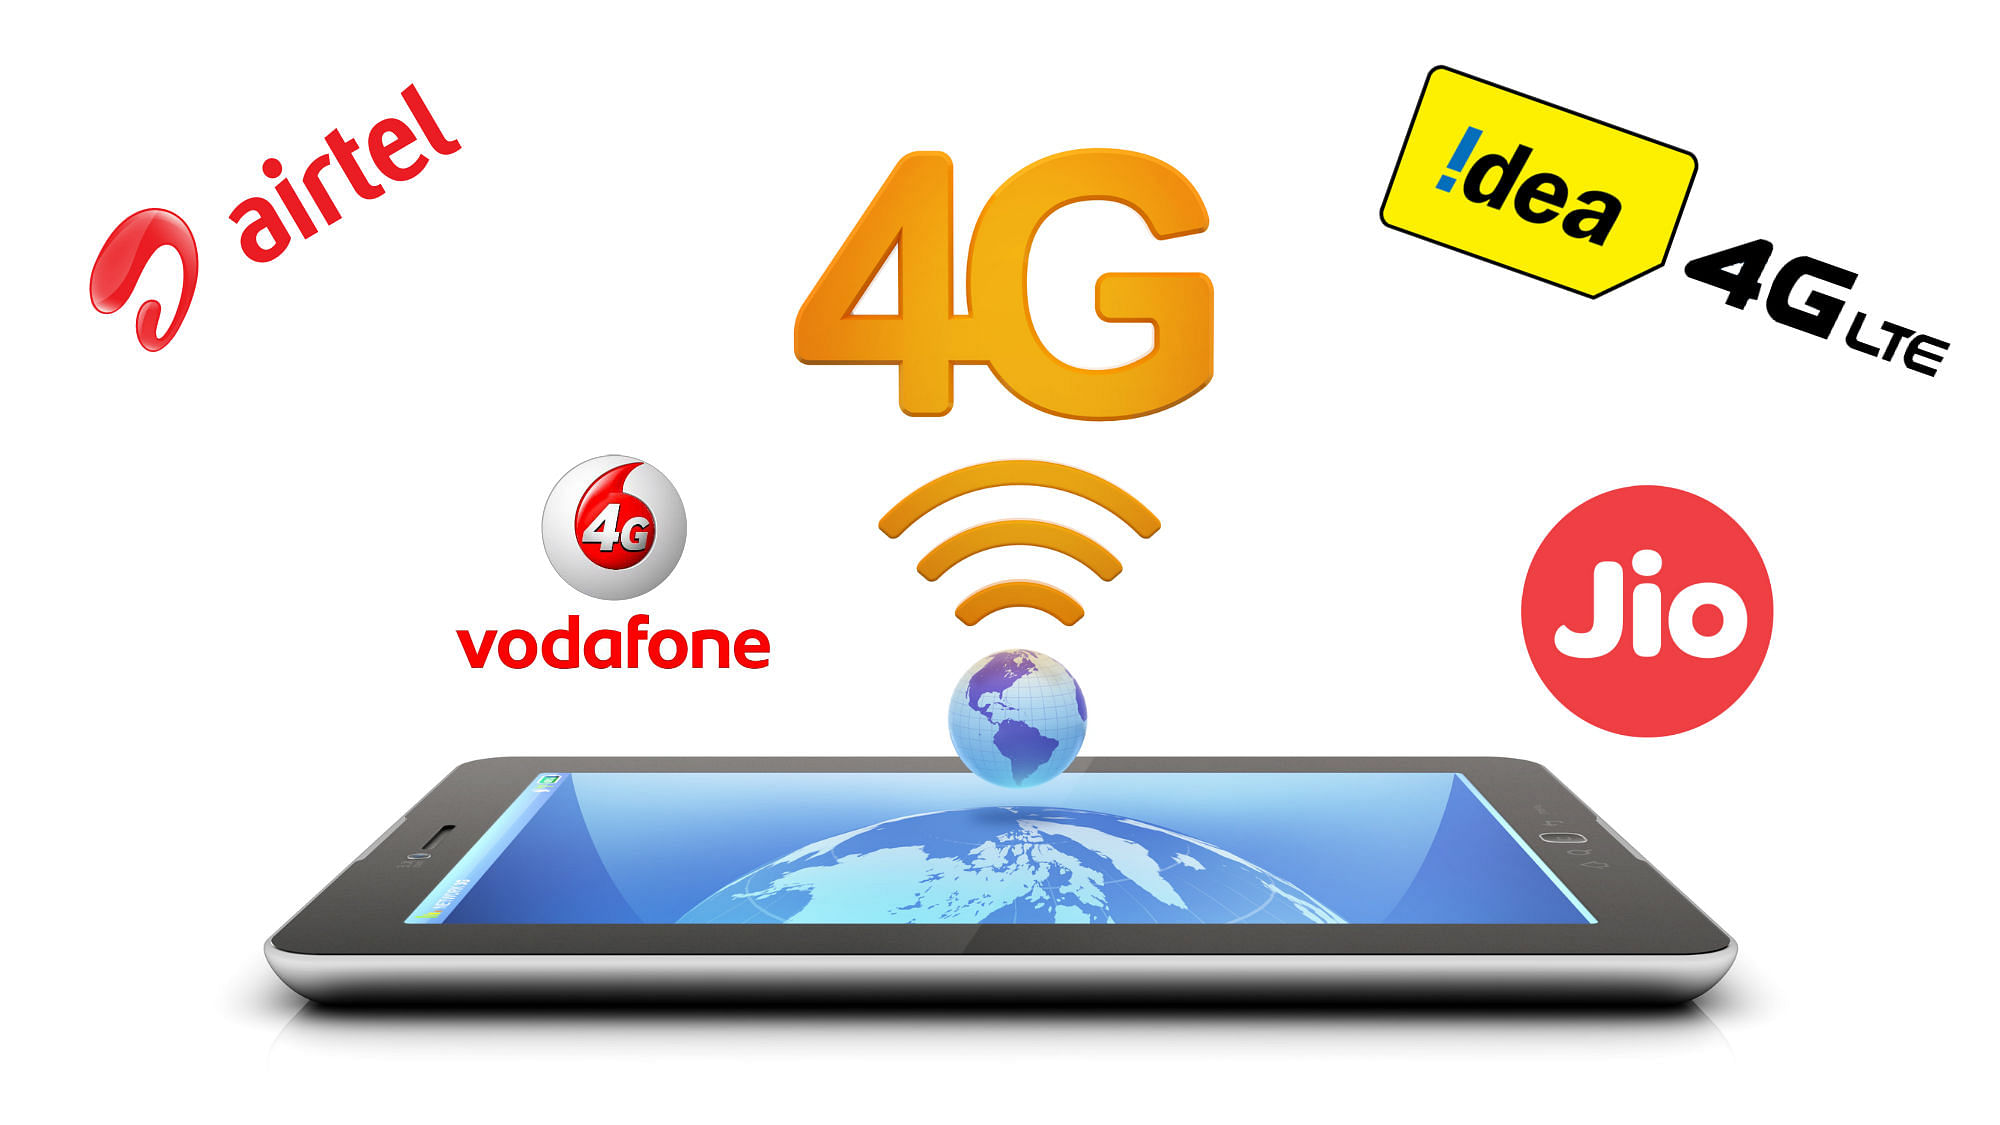 Telecom companies are biding for 4G bands in the spectrum auction.